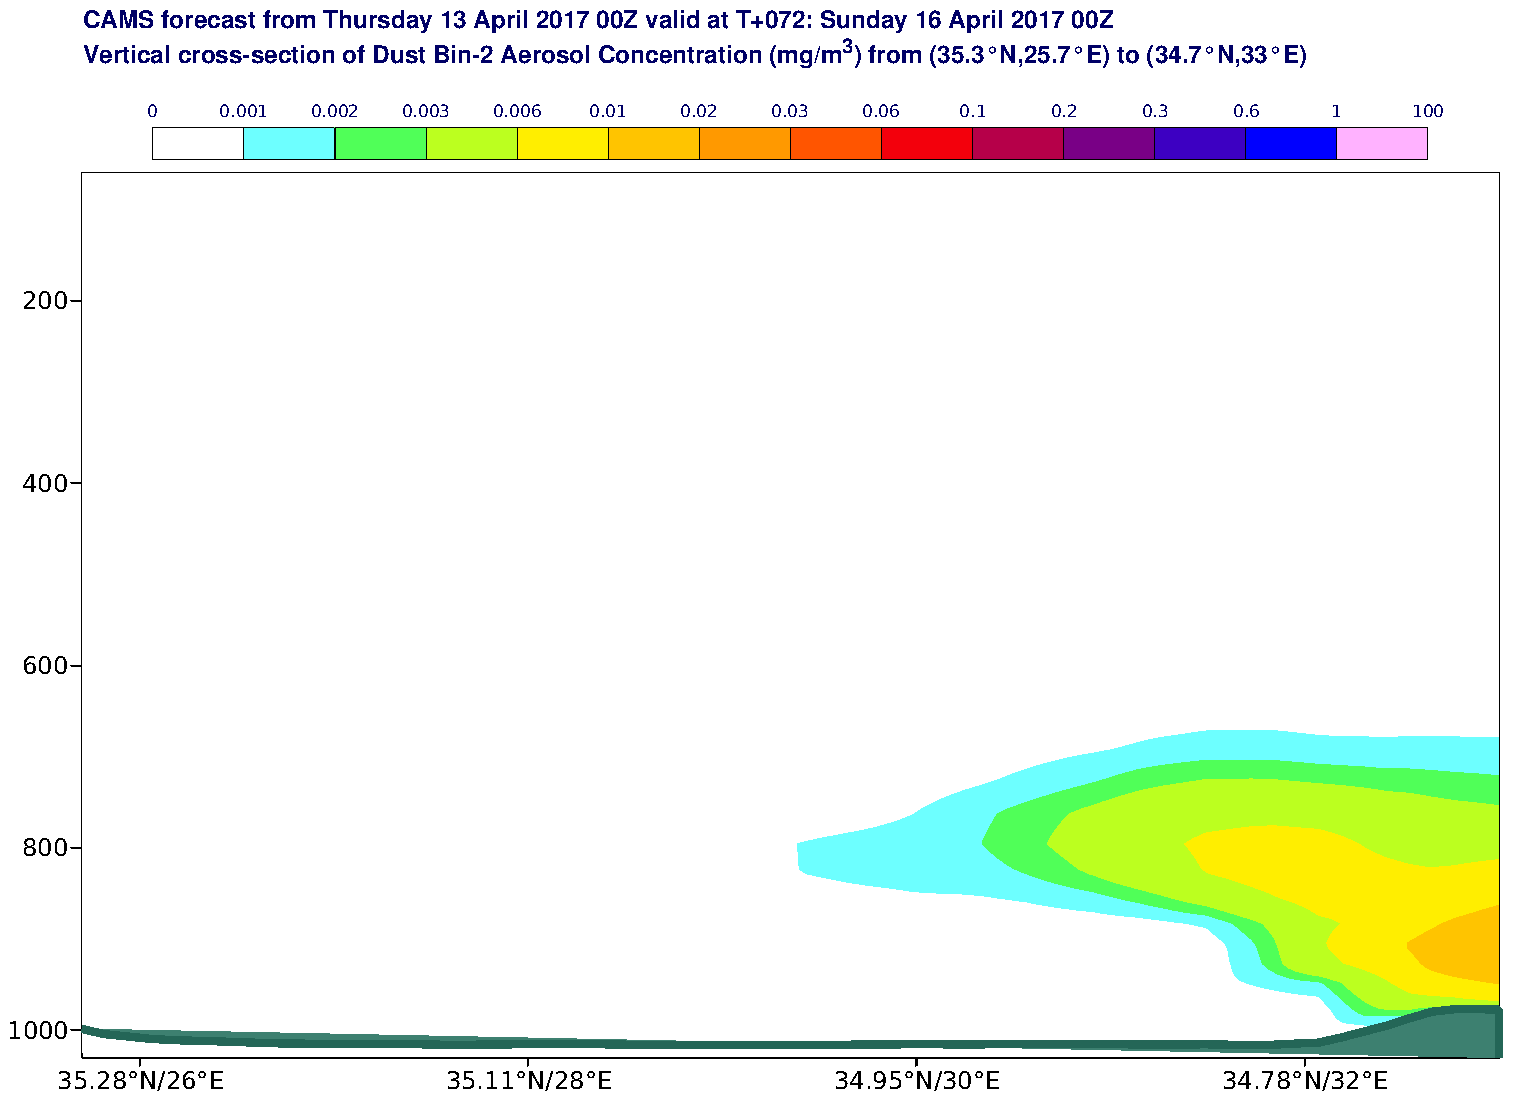 Vertical cross-section of Dust Bin-2 Aerosol Concentration (mg/m3) valid at T72 - 2017-04-16 00:00